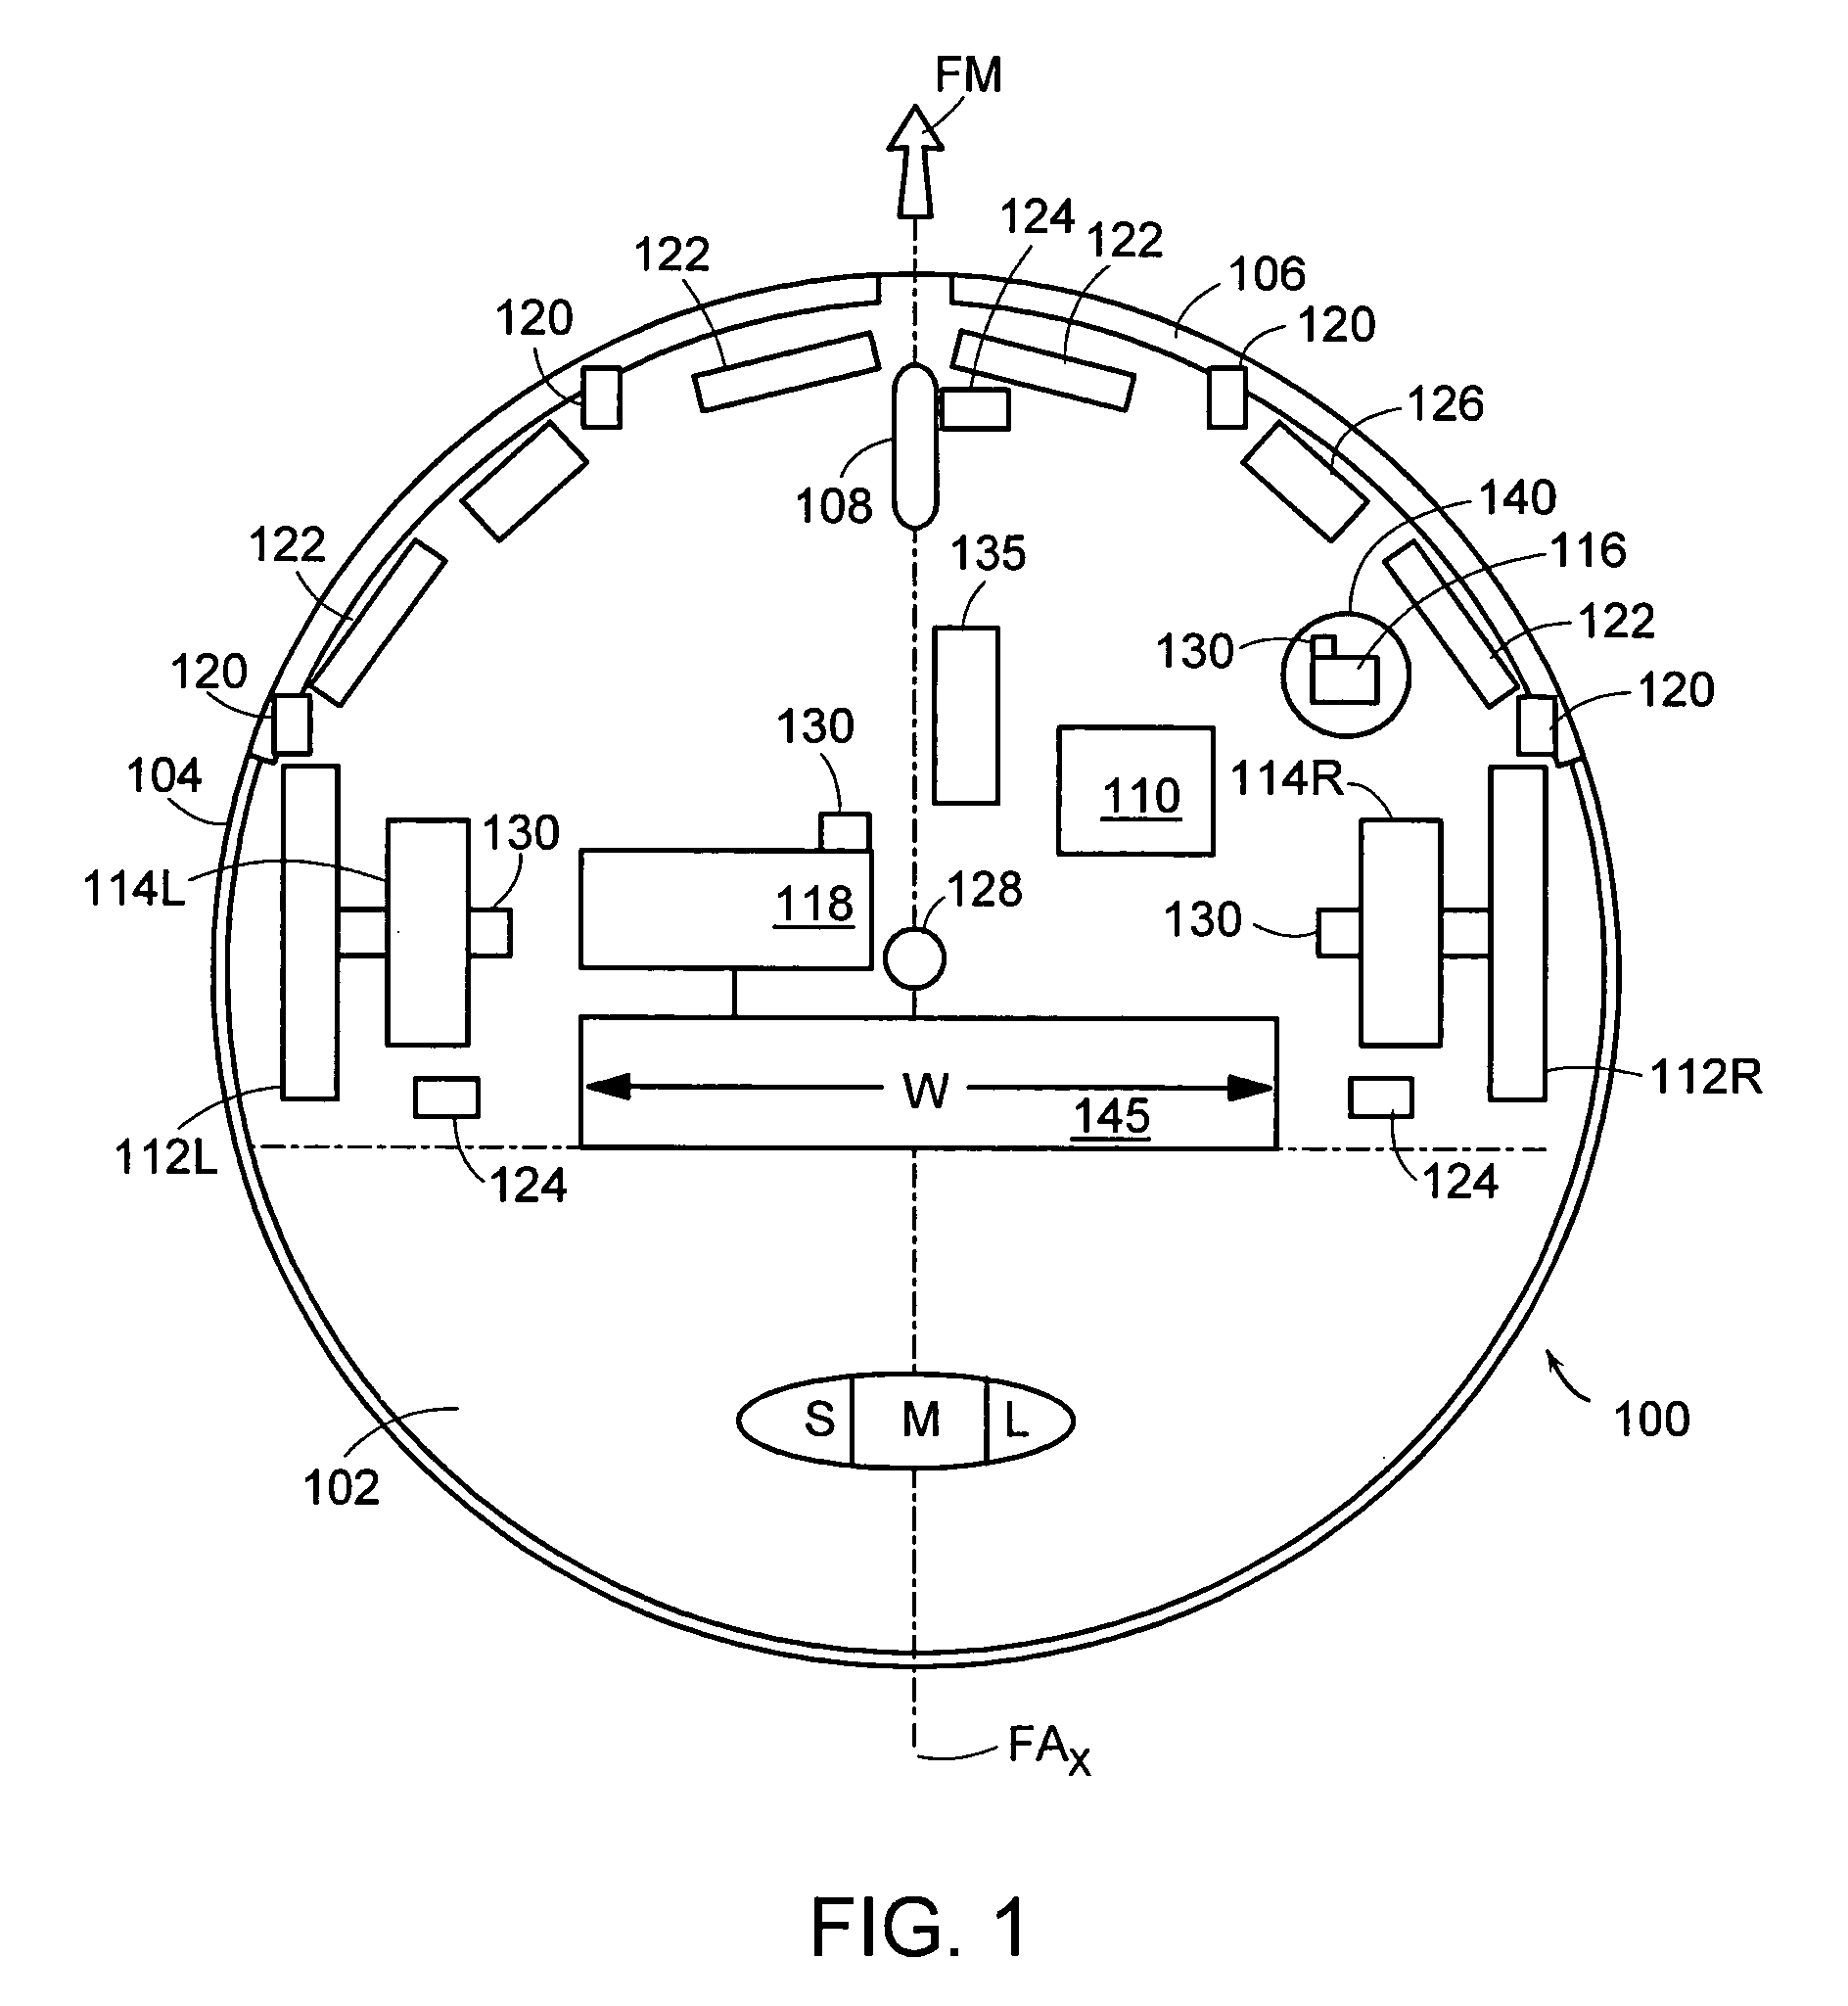 Navigational control system for a robotic device